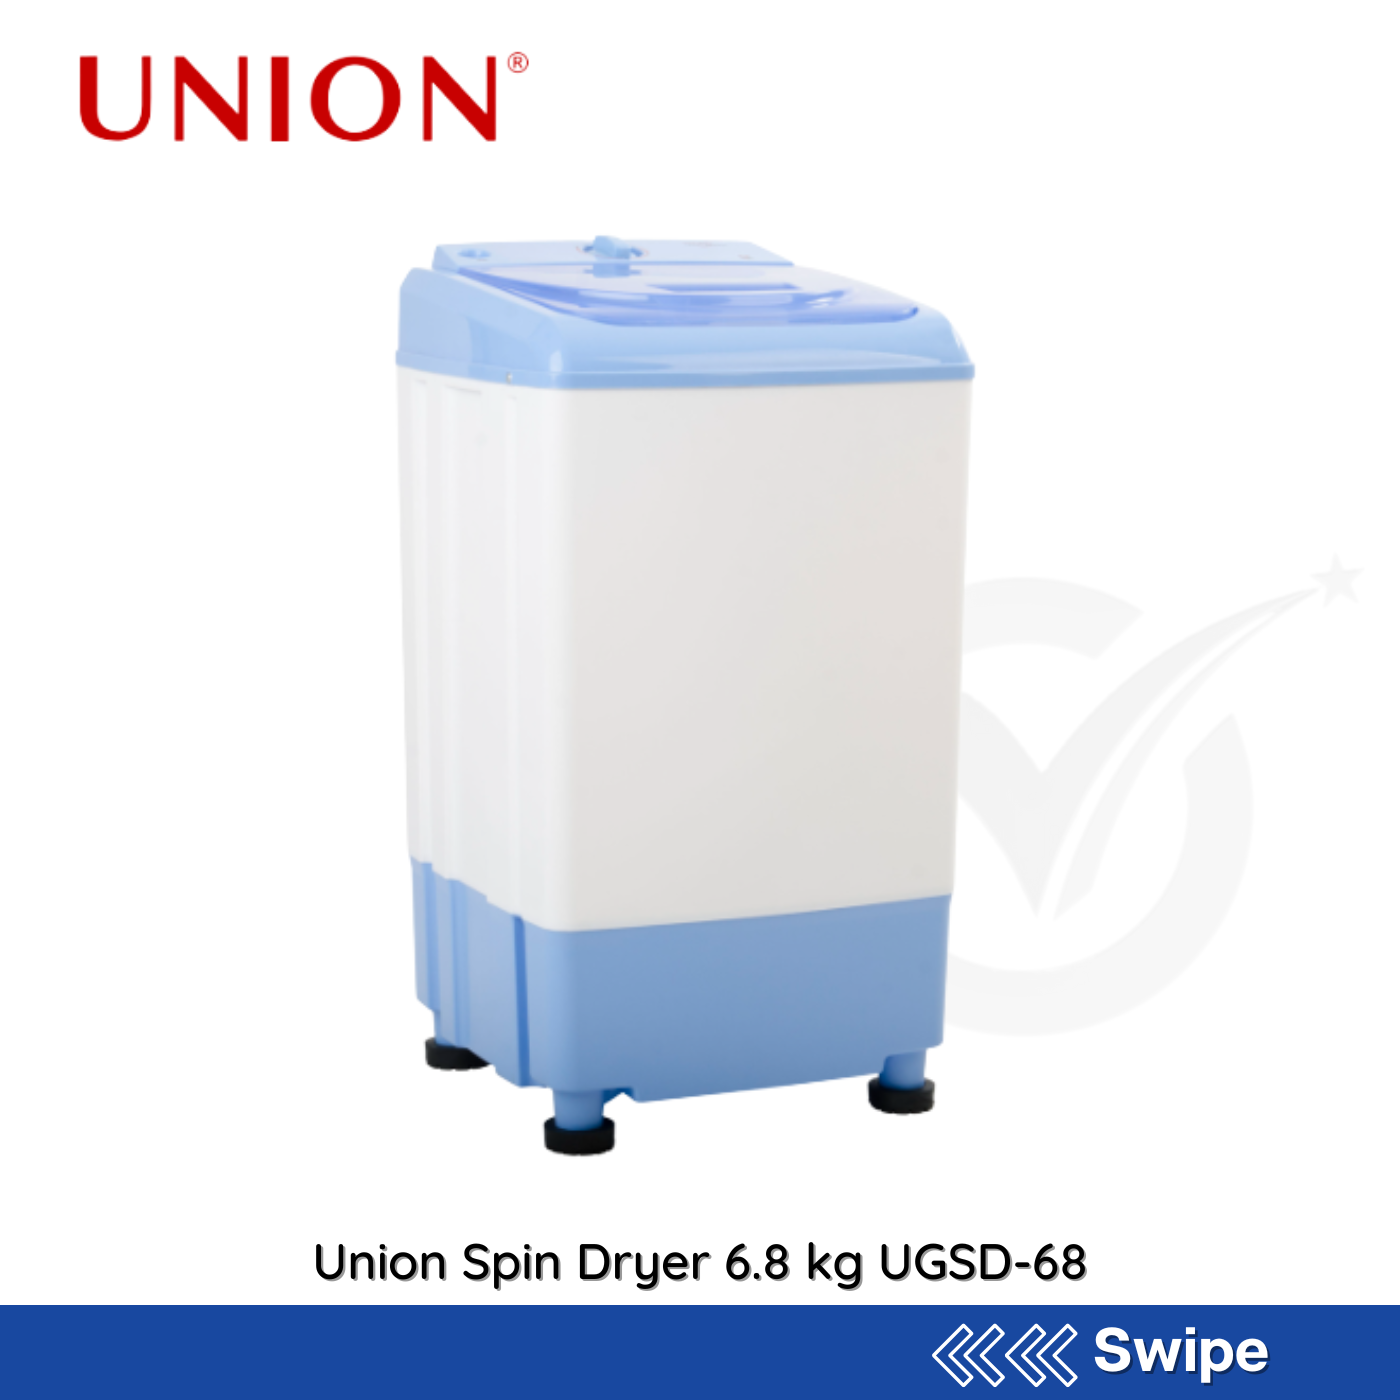 Union Spin Dryer 6.8 kg UGSD-68 - People's Choice Marketing